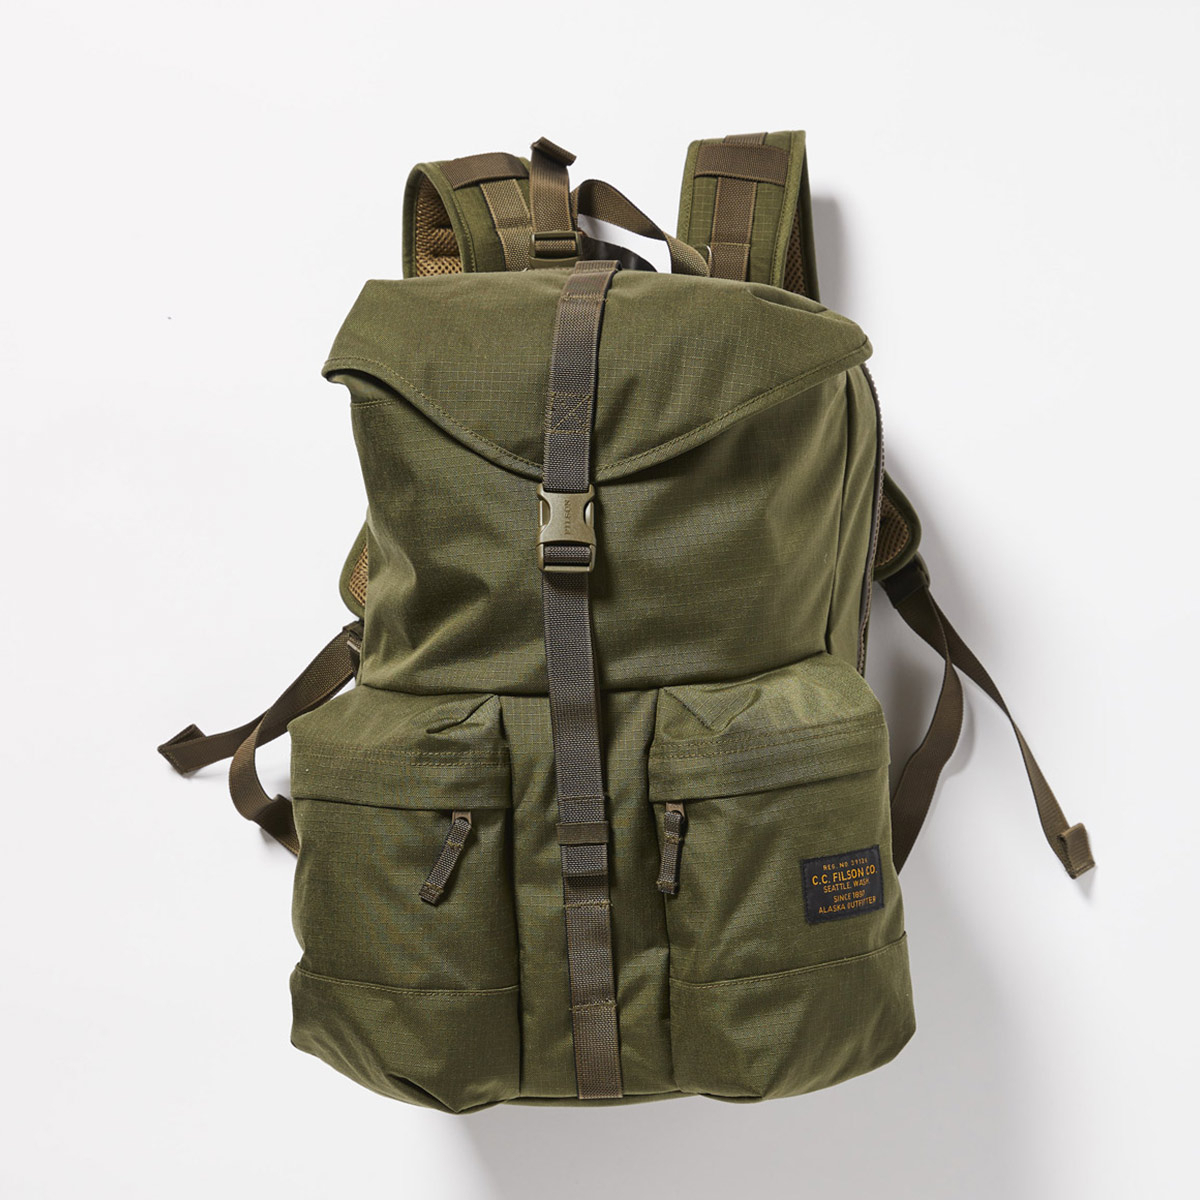 Filson Ripstop Nylon Backpack Surplus Green, lightweight and tough backpack